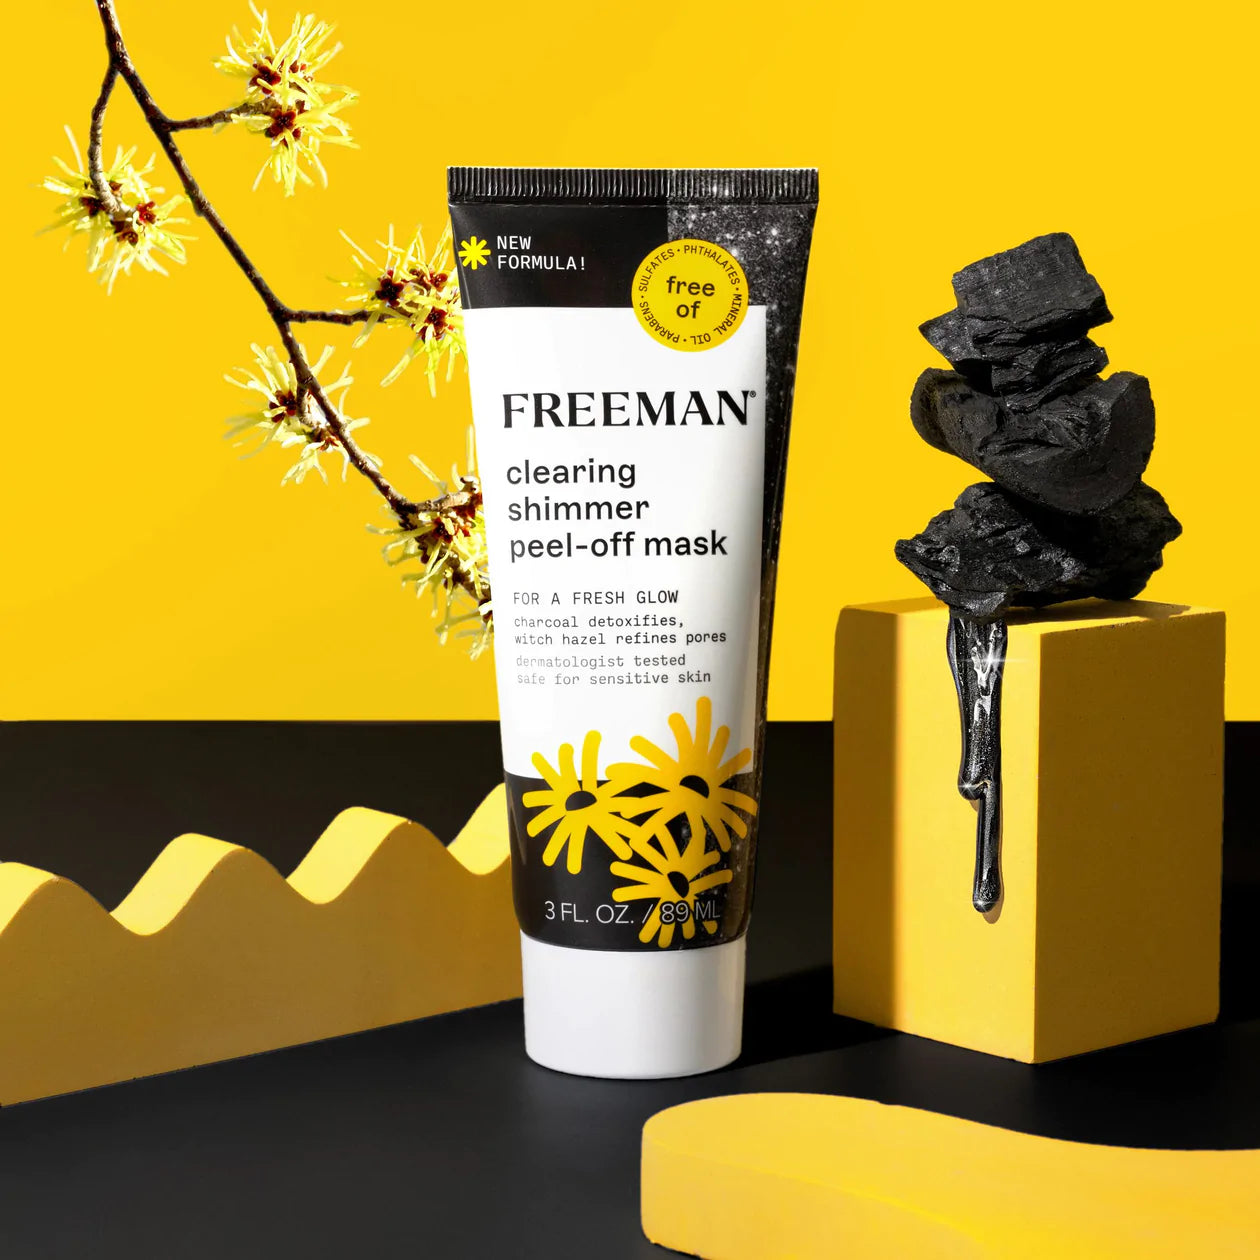 FREEMAN Clearing Shimmer Charcoal & Witch Hazel Peel Off Mask بيل اوف ماسك بالفحم